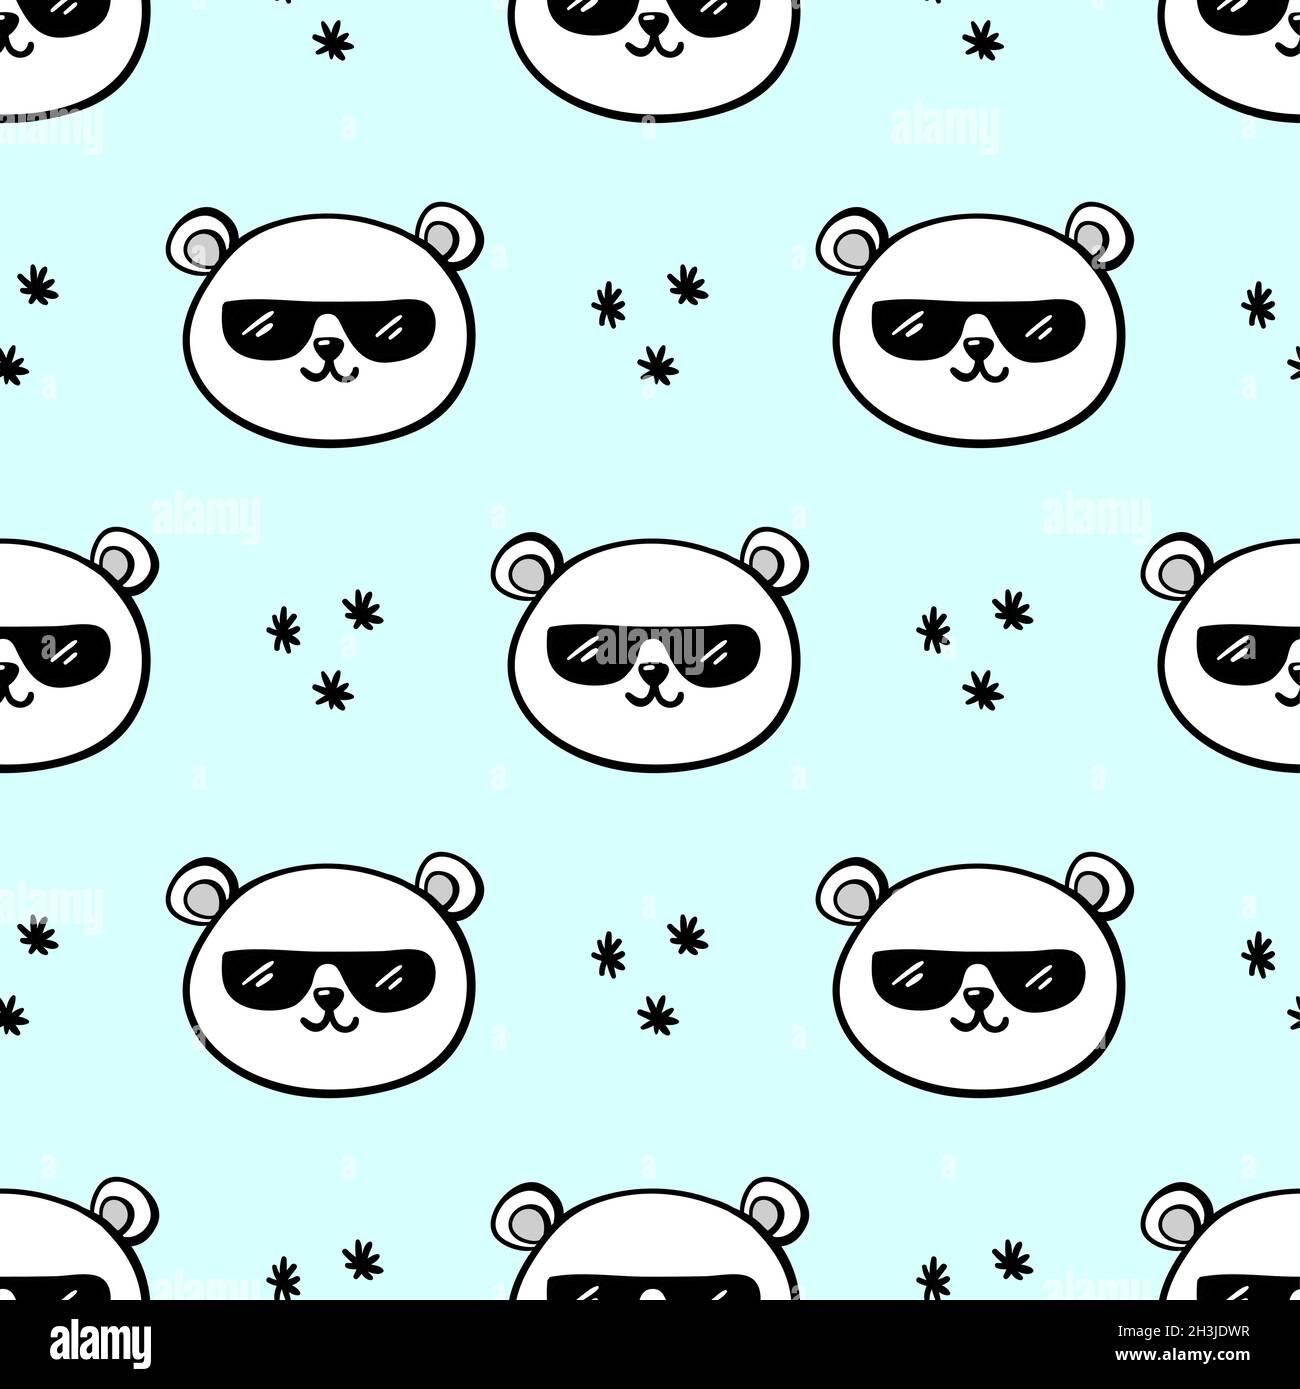 Polar bear with sunglasses and snowflakes cute trendy seamless pattern isolated on blue background Stock Vector